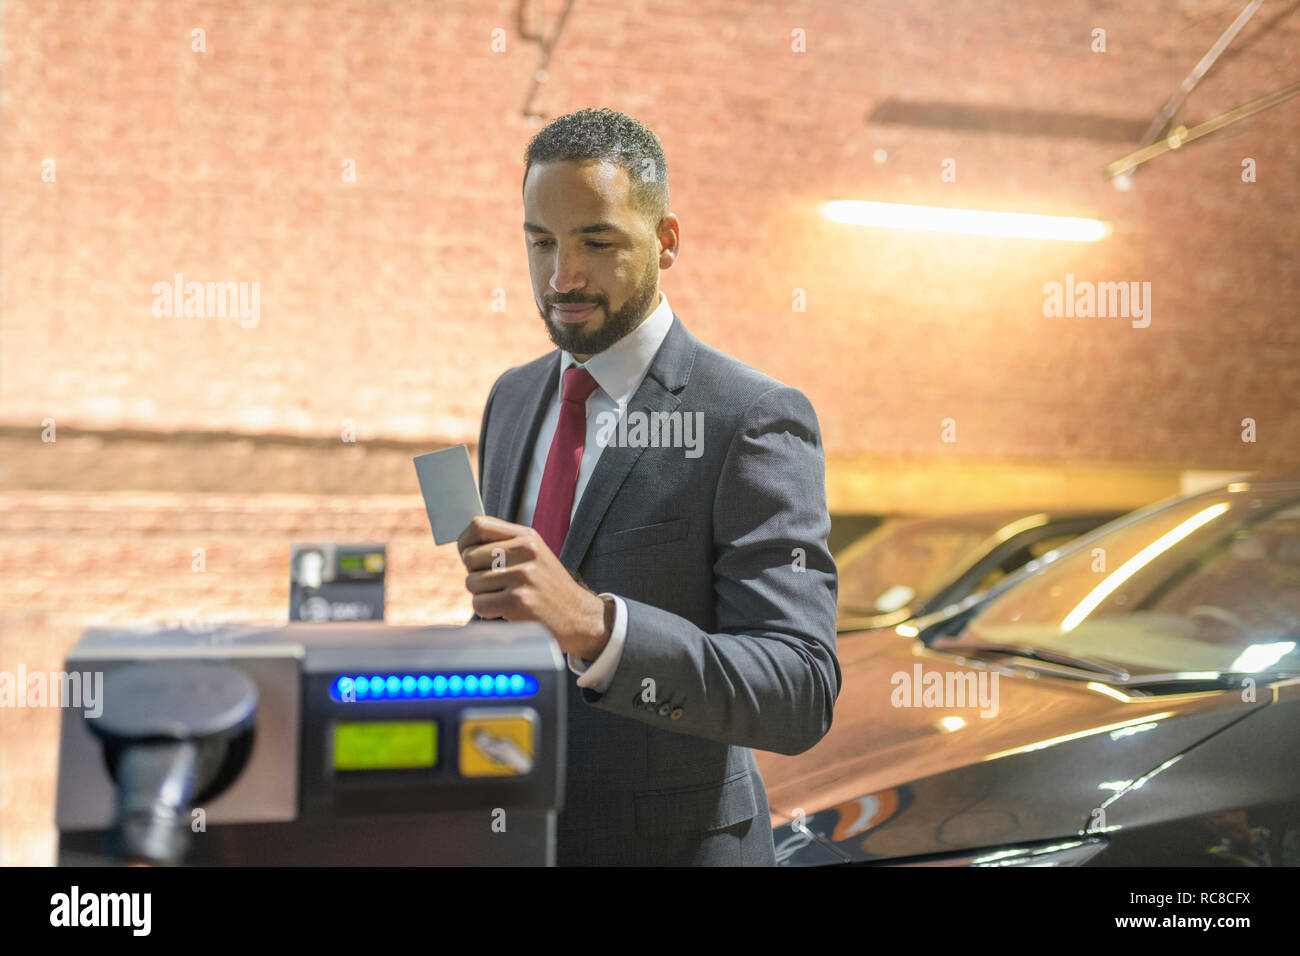 Businessman using access card at electric vehicle charging station, Manchester, UK Stock Photo